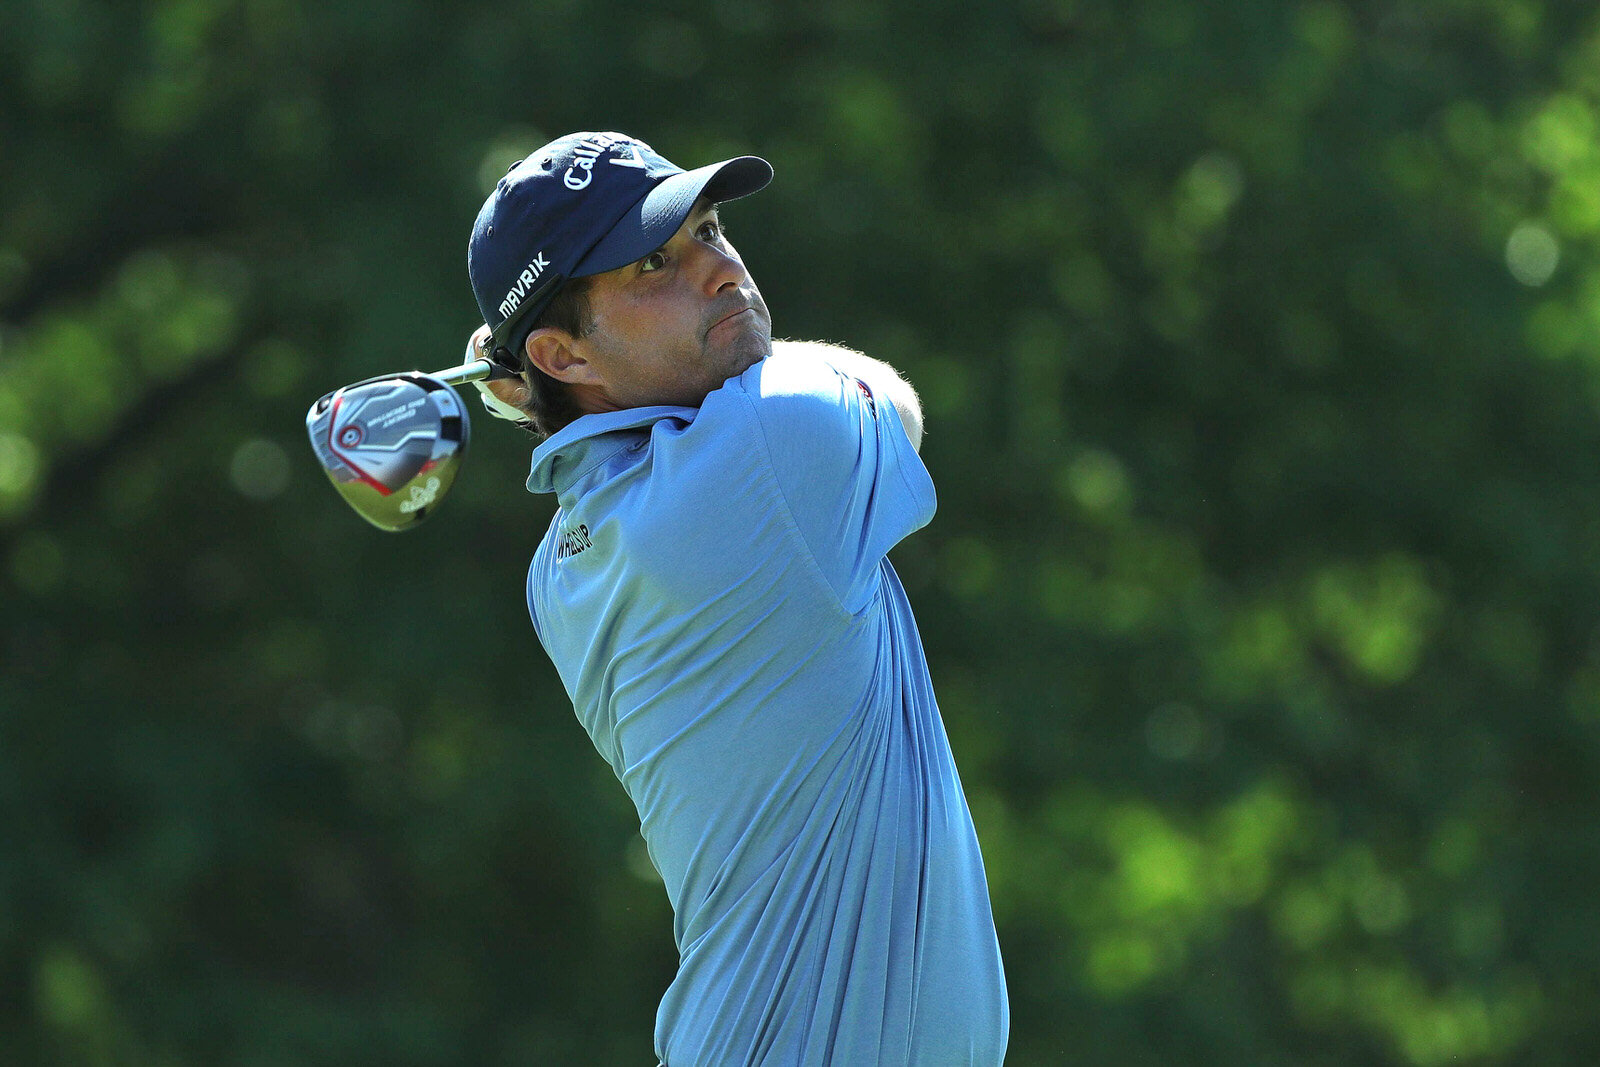  DETROIT, MICHIGAN - JULY 05: Kevin Kisner of the United States plays his shot from the 18th tee during the final round of the Rocket Mortgage Classic on July 05, 2020 at the Detroit Golf Club in Detroit, Michigan. (Photo by Leon Halip/Getty Images) 